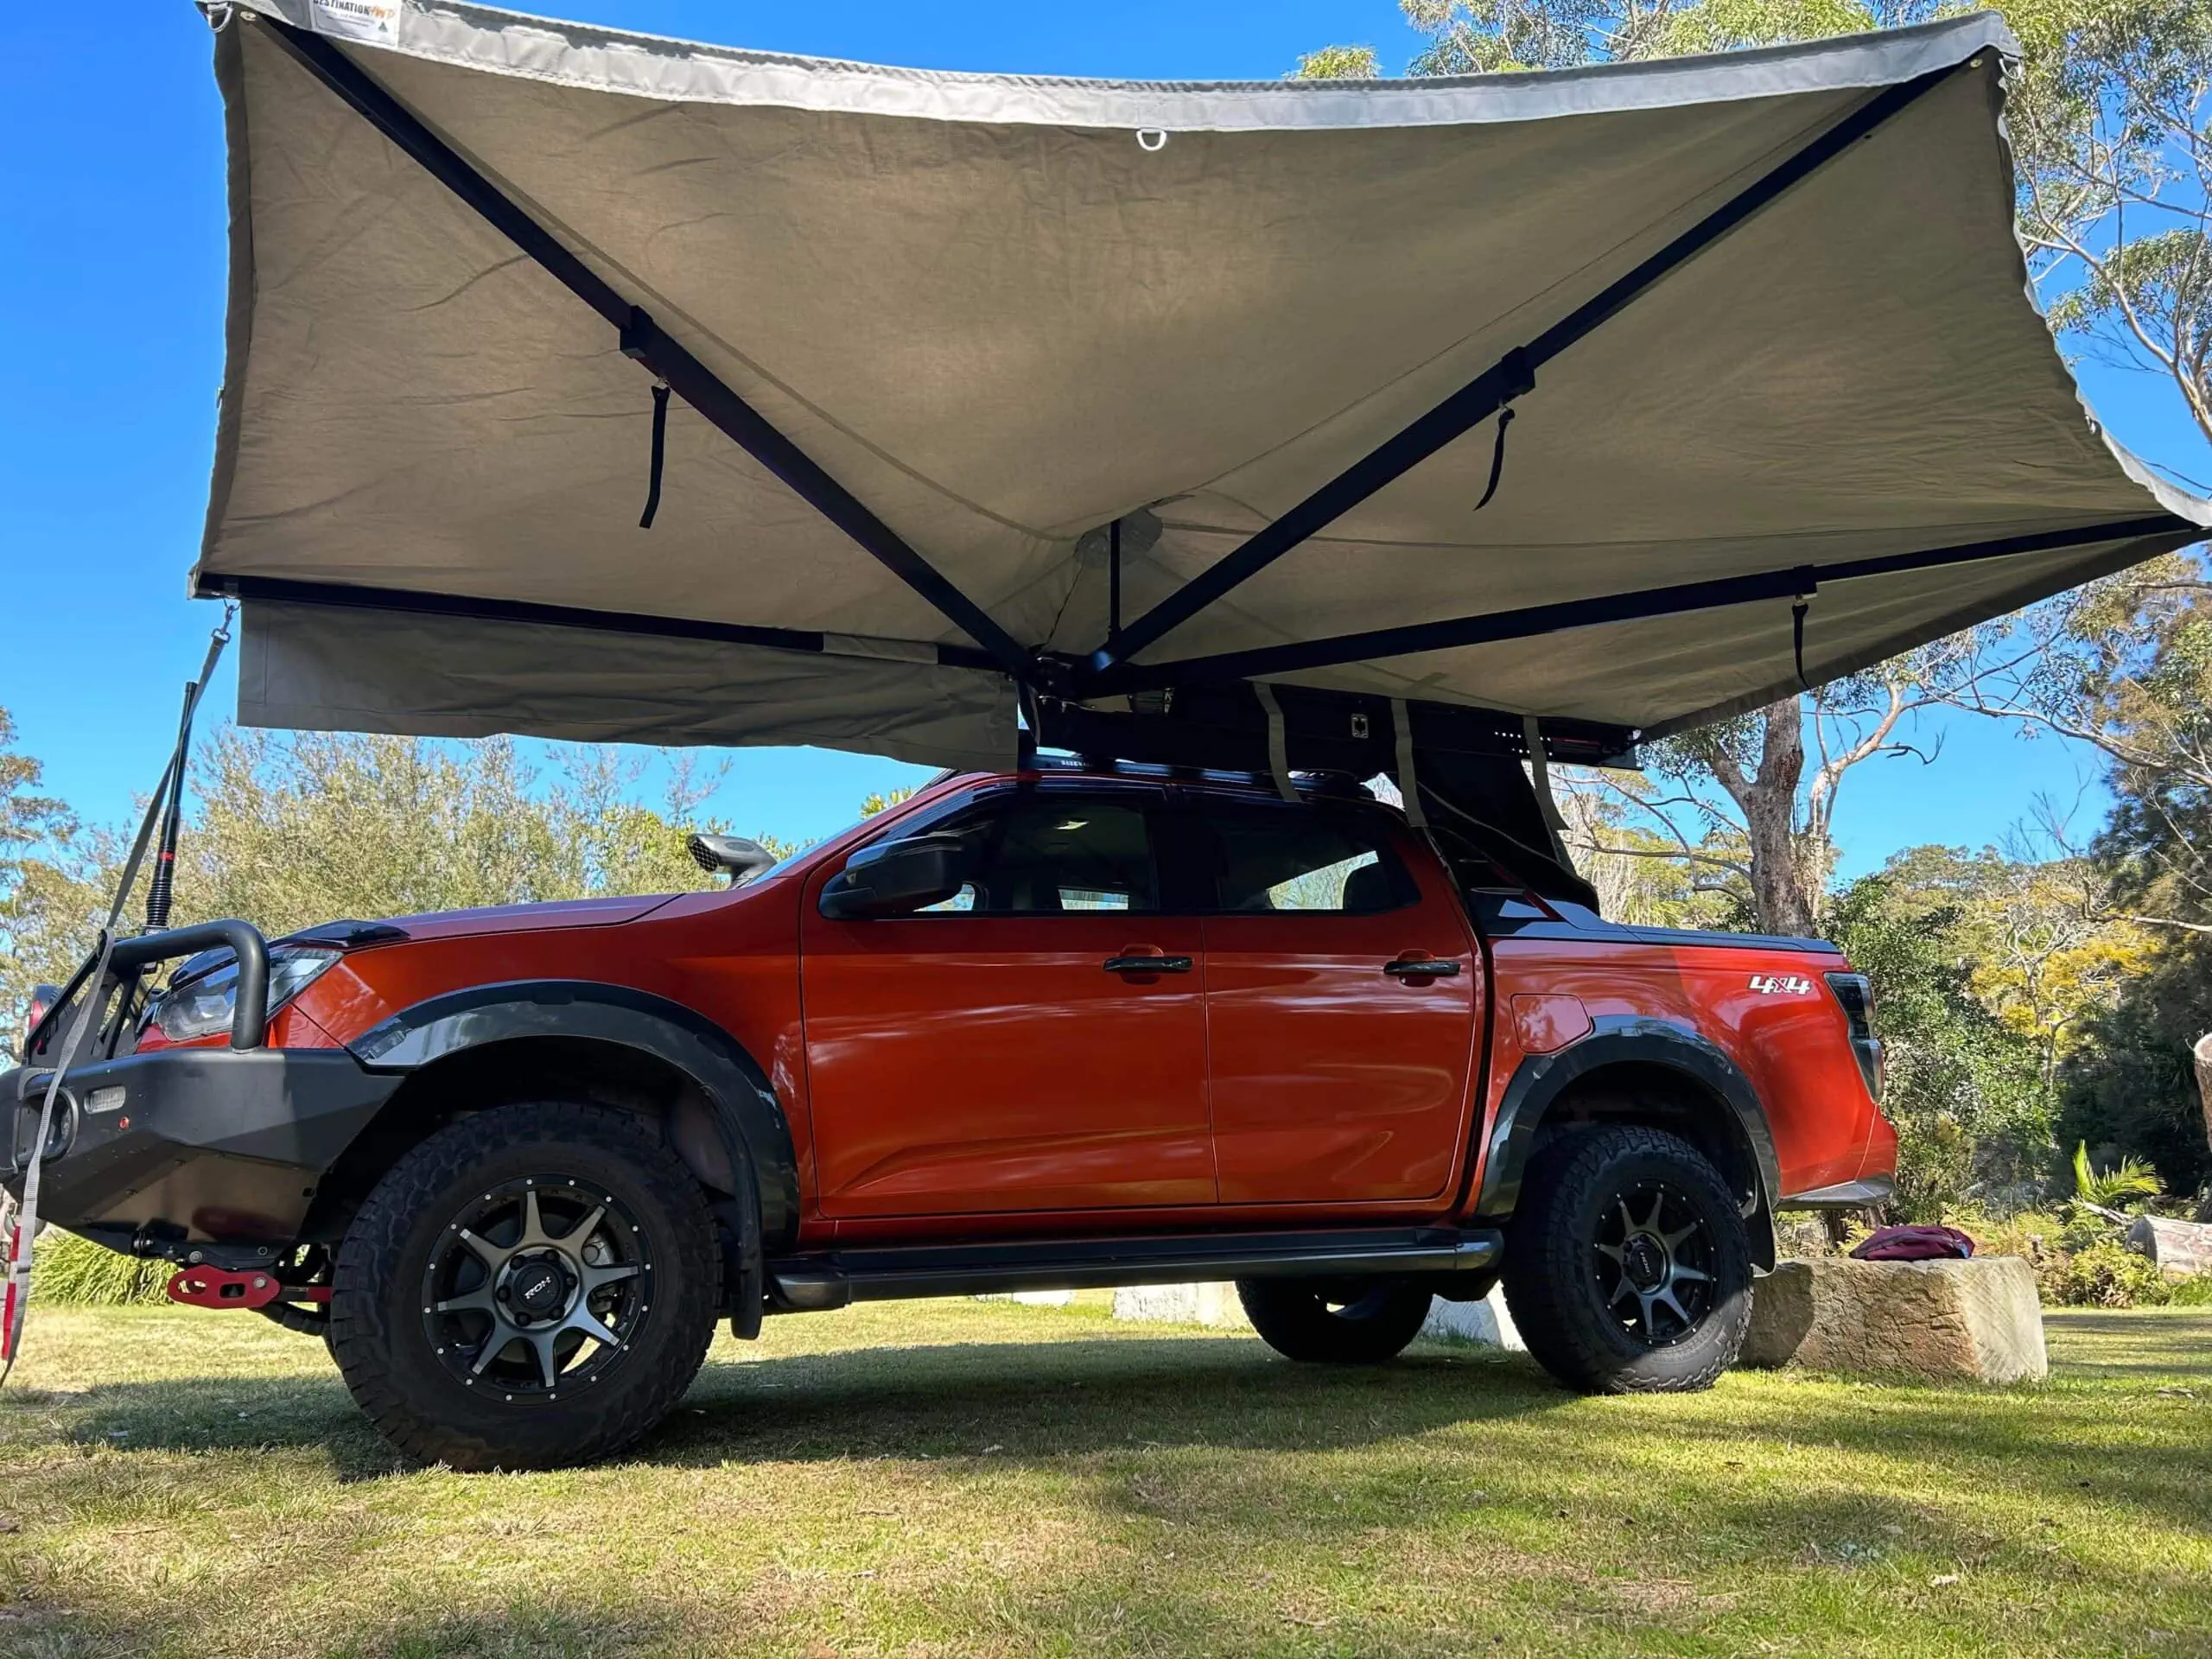 Destination4WD free standing 180 degree 4WD awnings